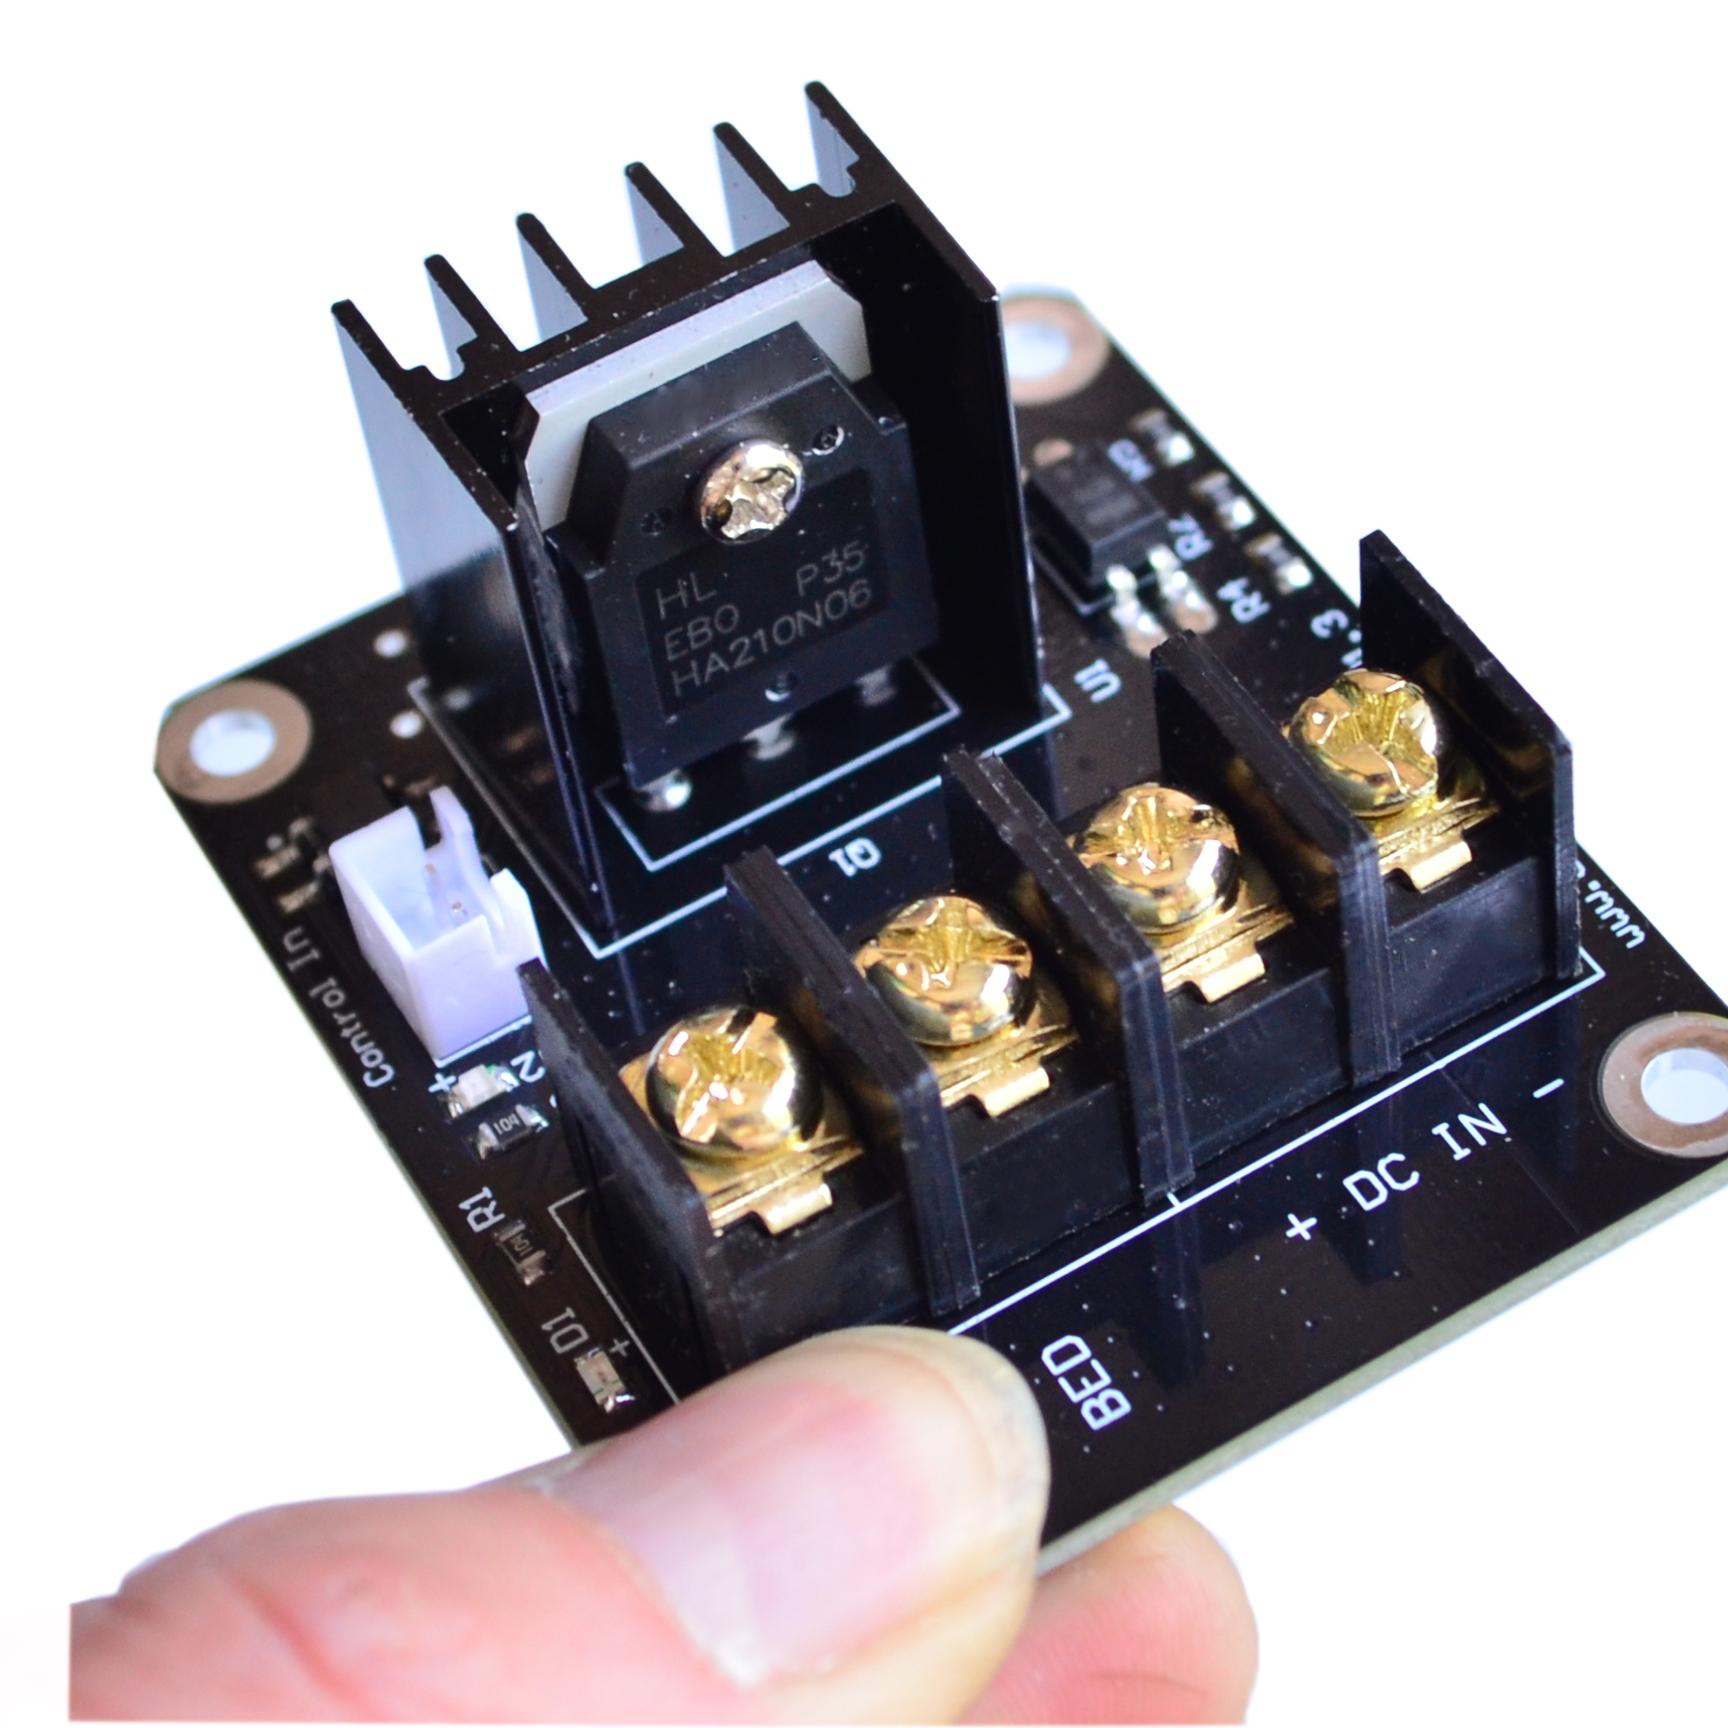 3D printer hot bed Power expansion card /MOS high current load module / Heat dissipation power module For